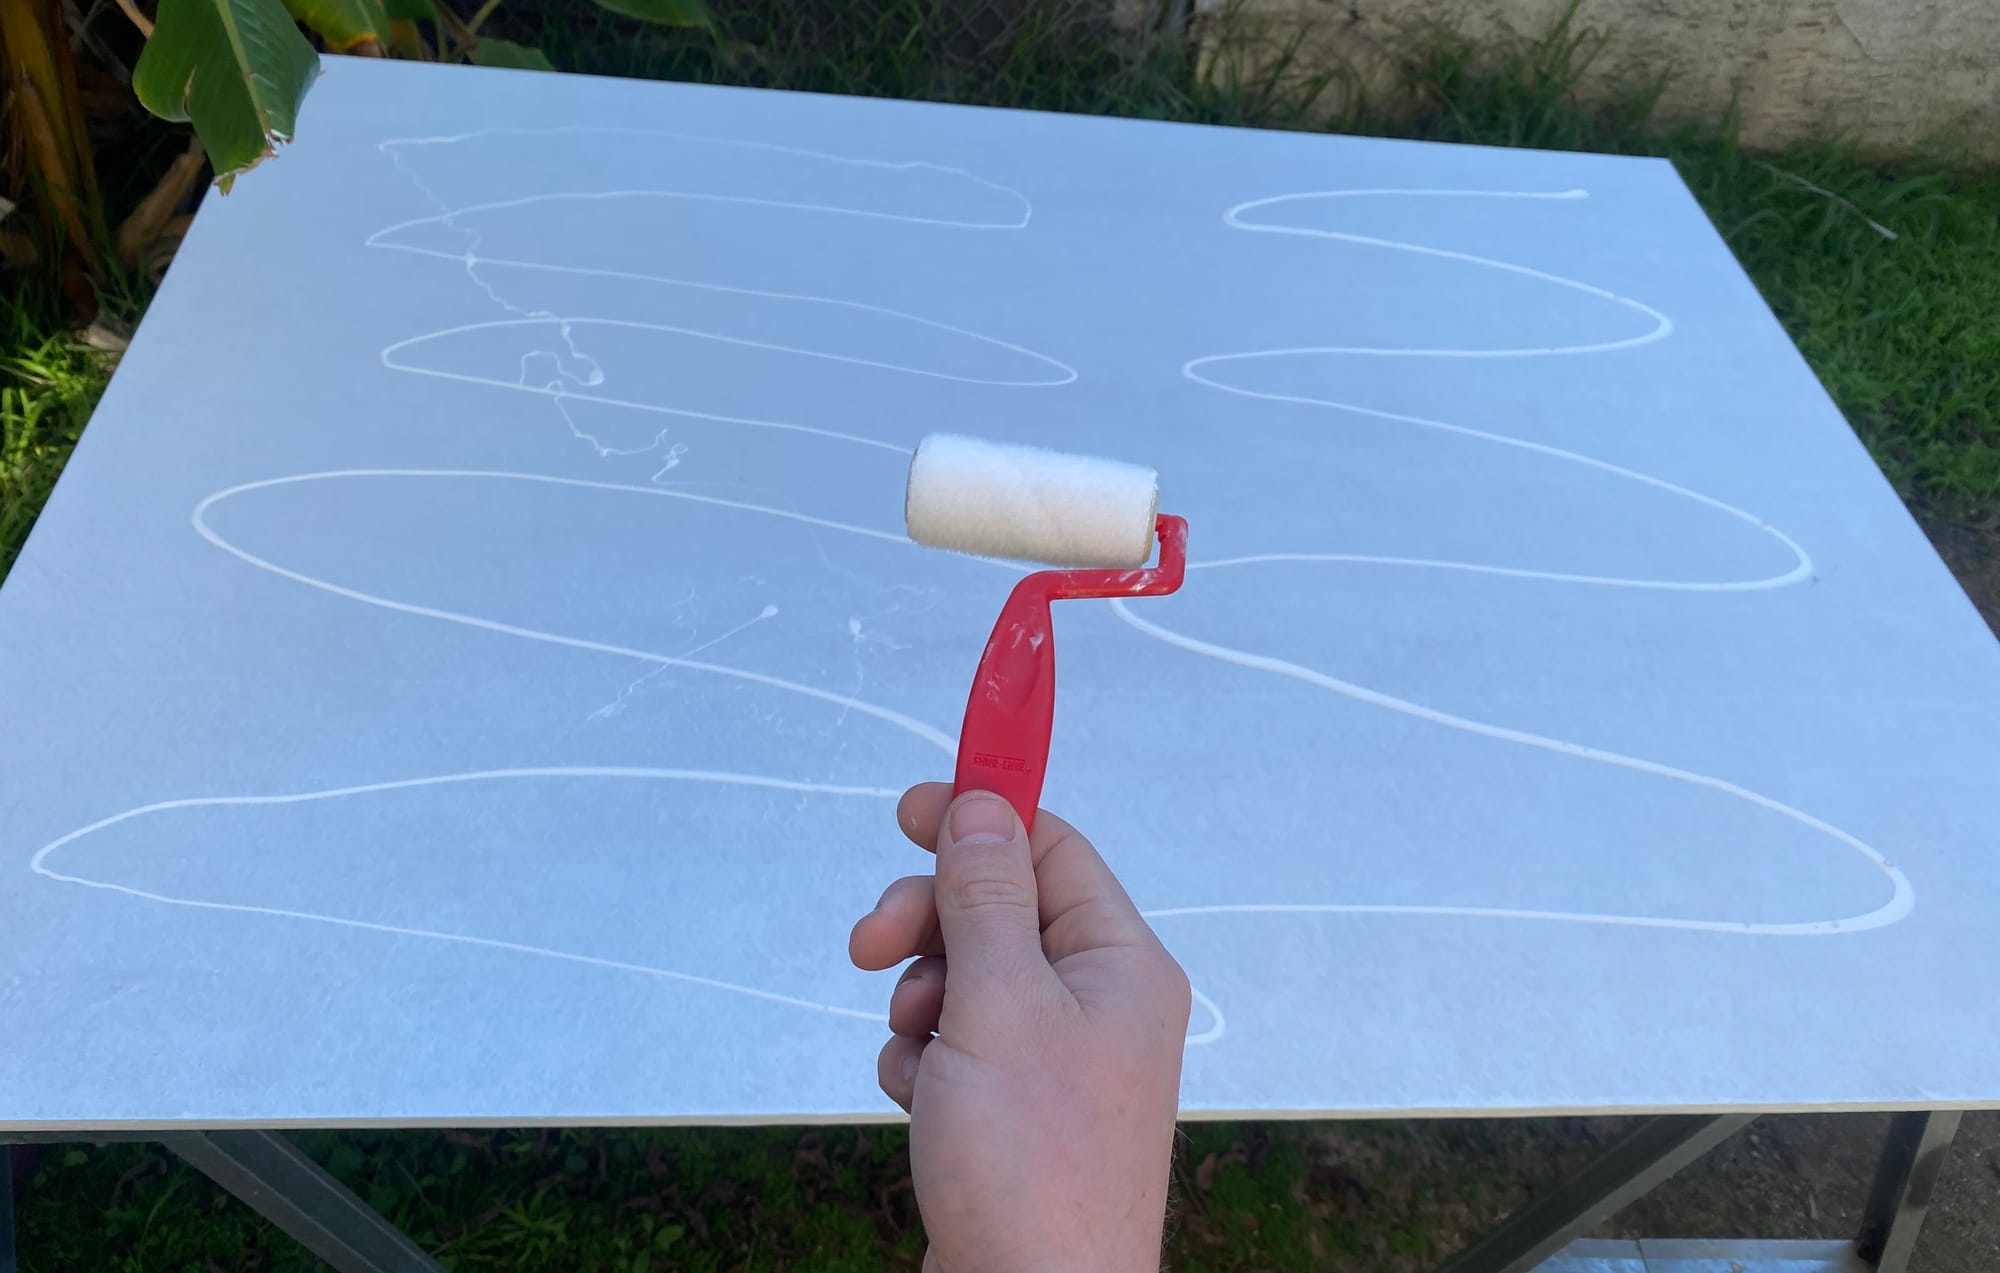 Basic paint roller being held in front of a flat board with zigzag lines of paint ready to be smoothed to an even finish.